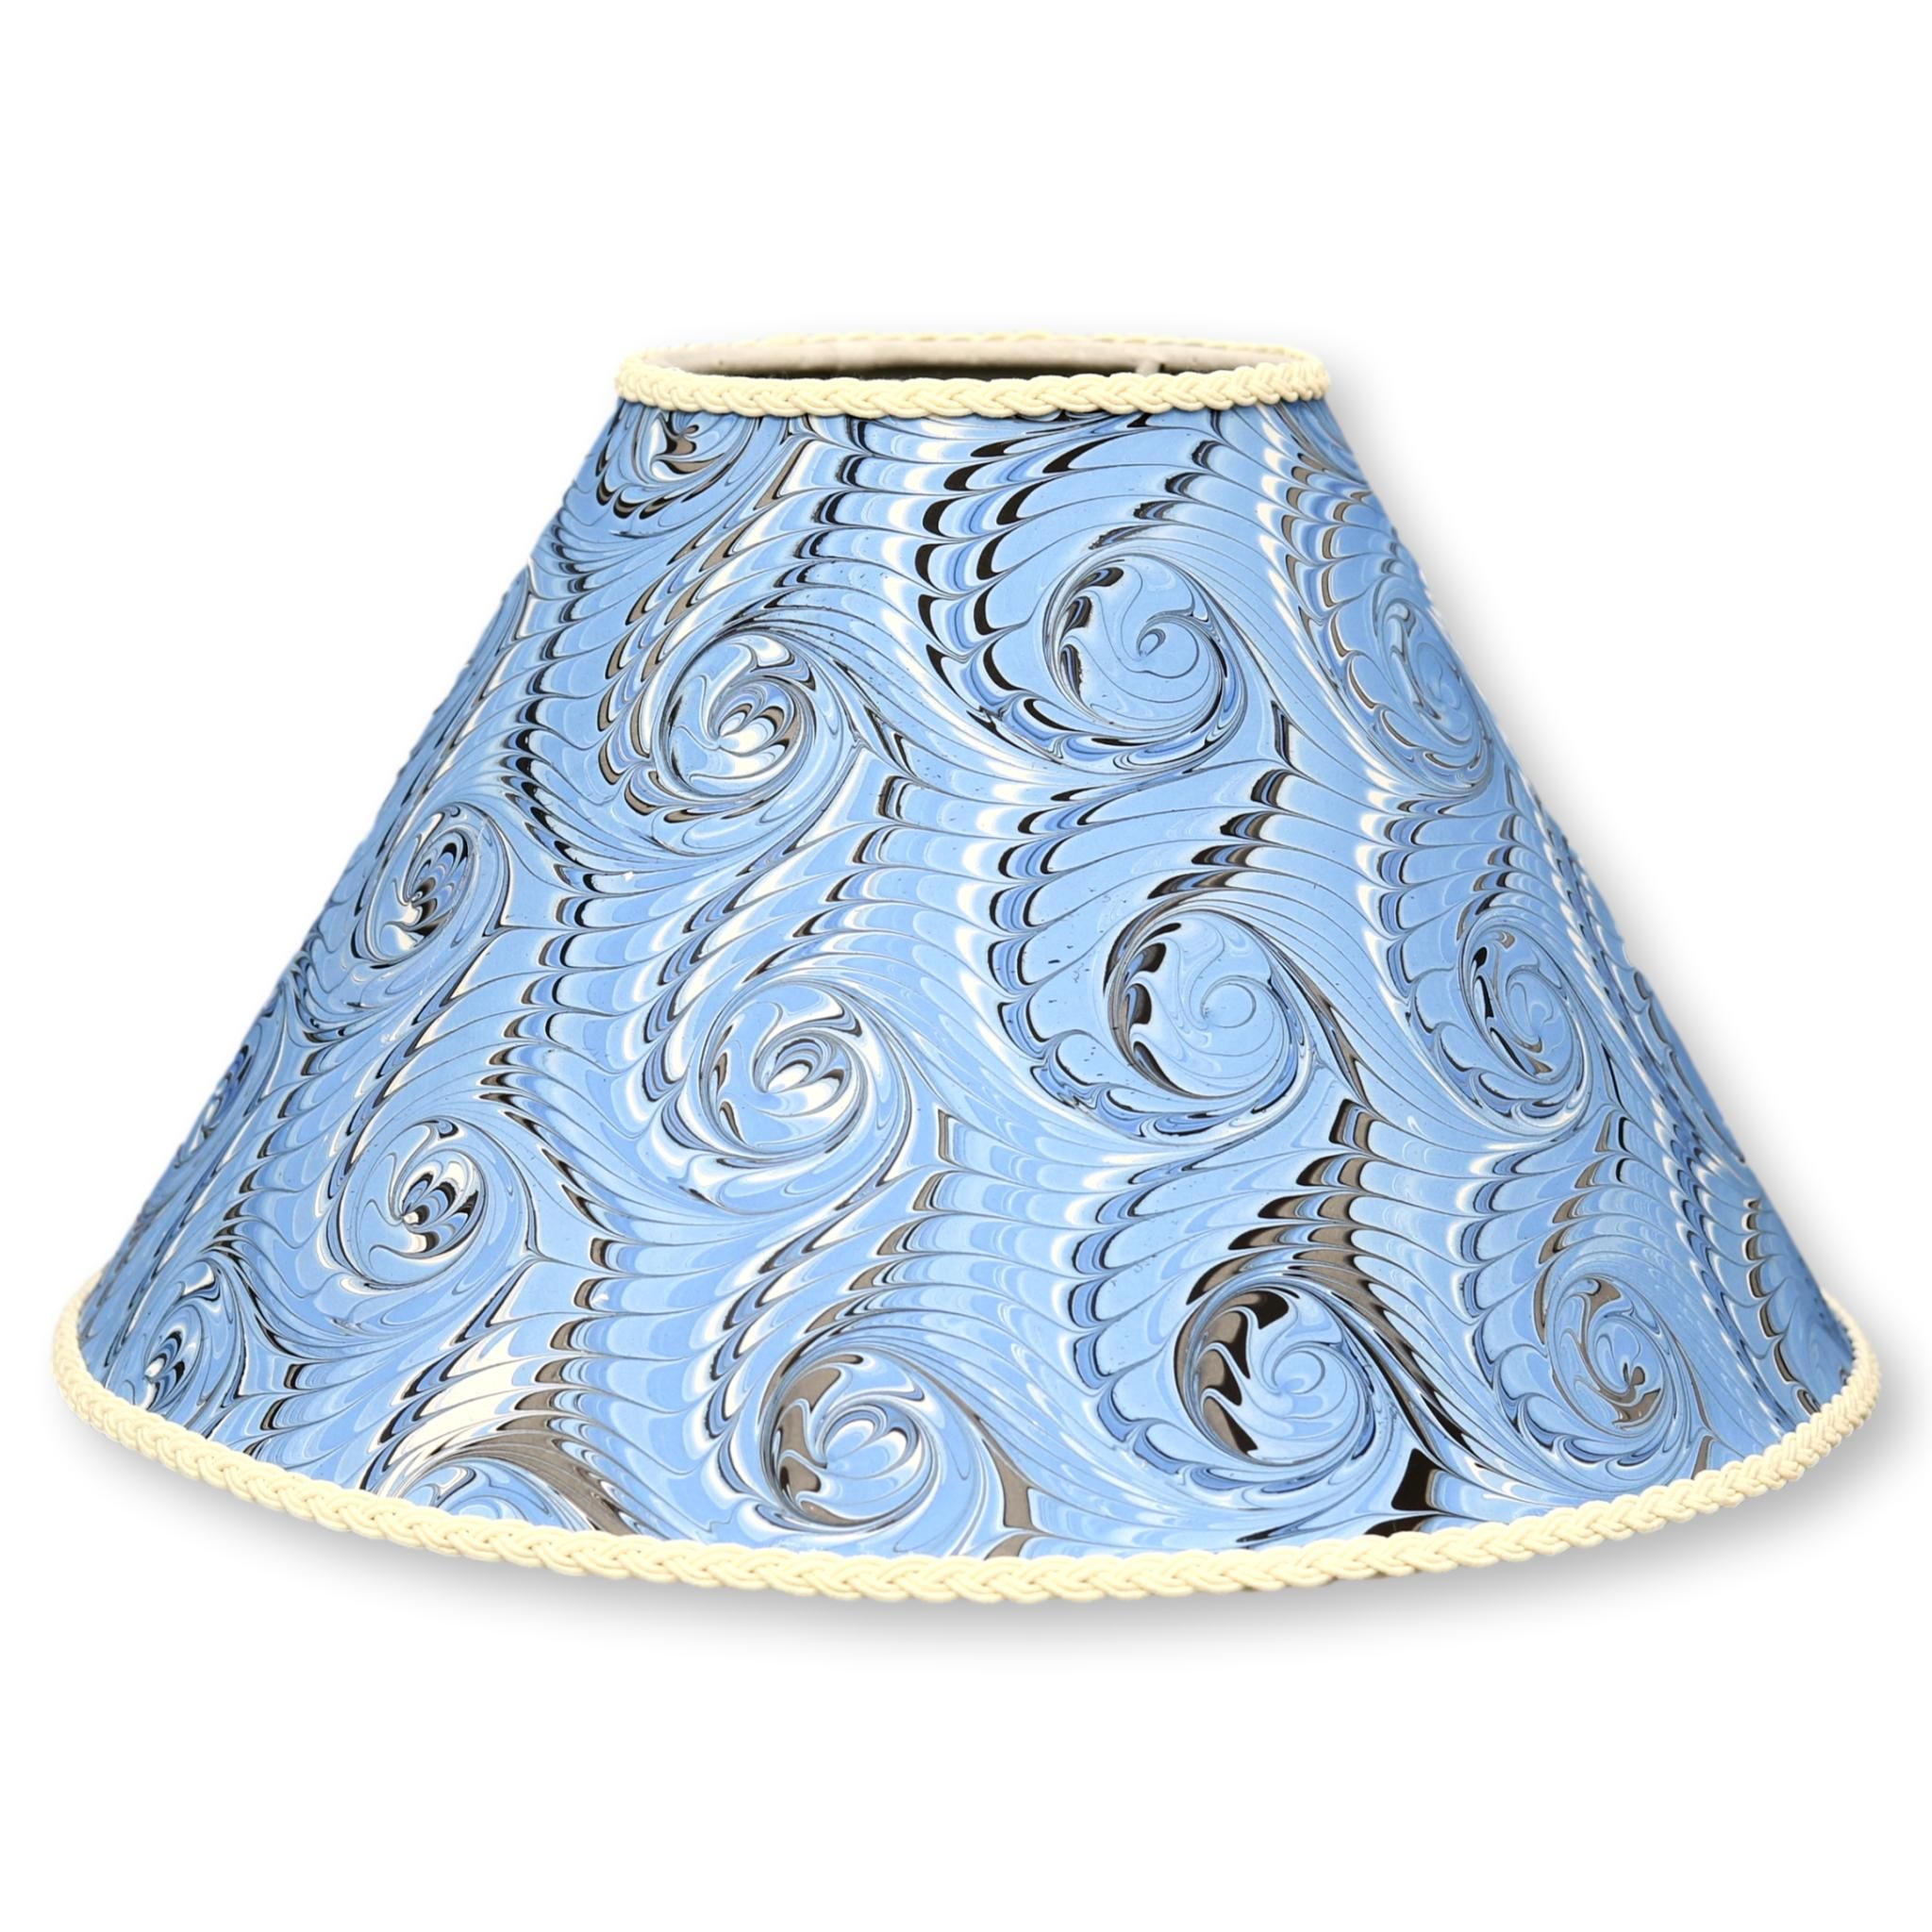 Vintage Hand-Marbled Paper Lampshade | One Kings Lane